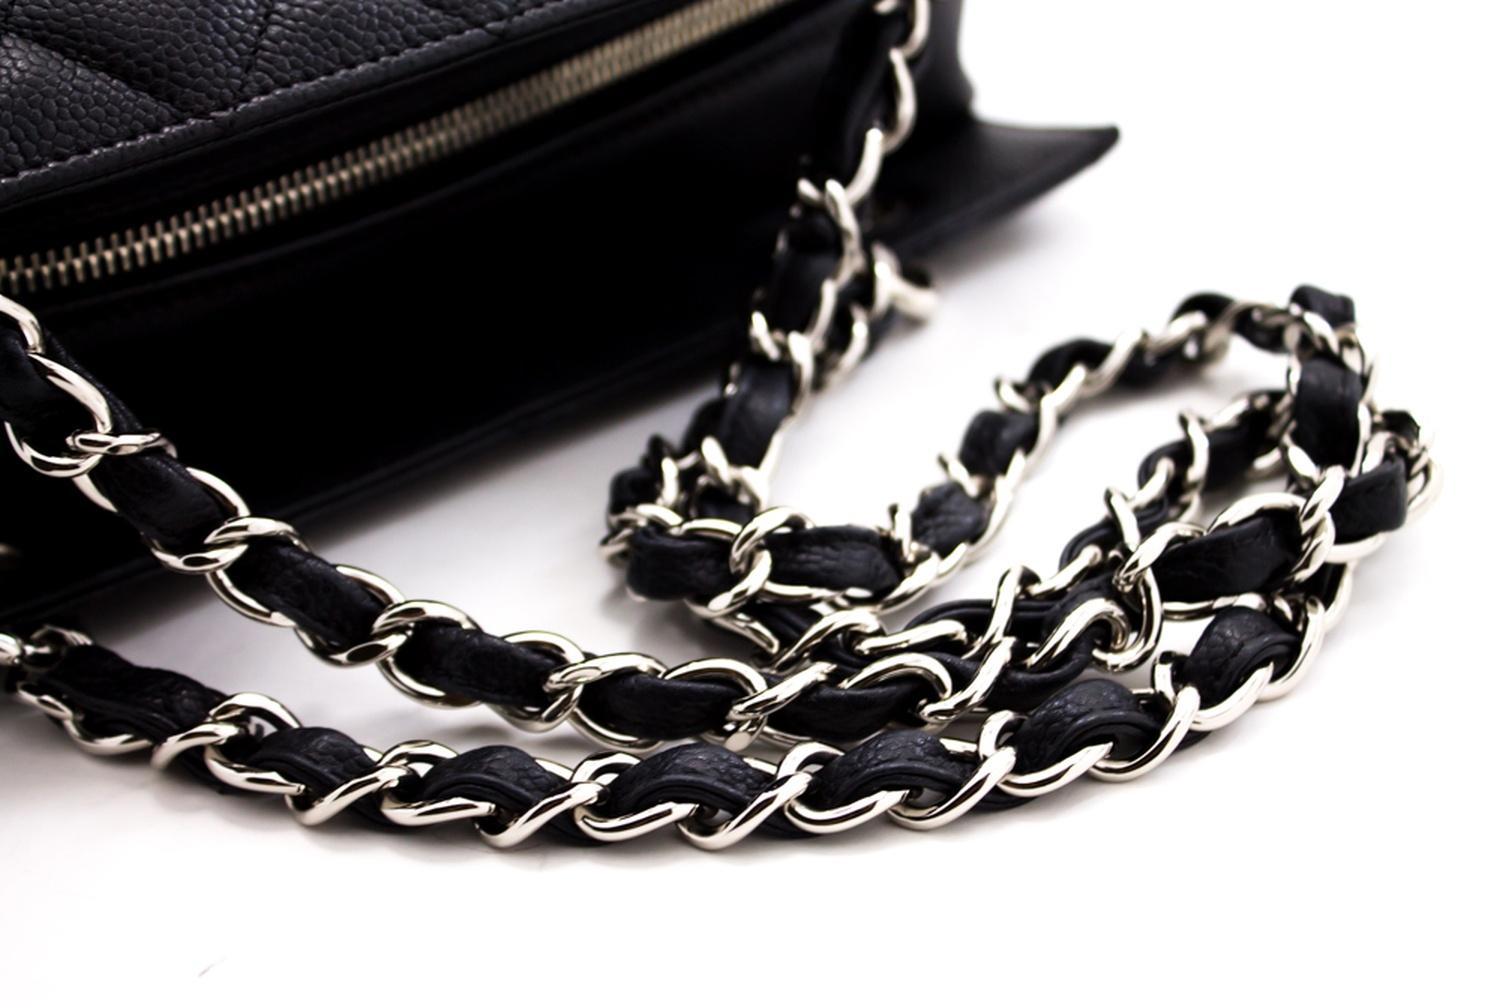 CHANEL Caviar Chain Shoulder Shopping Tote Bag Black Silver Leather 9